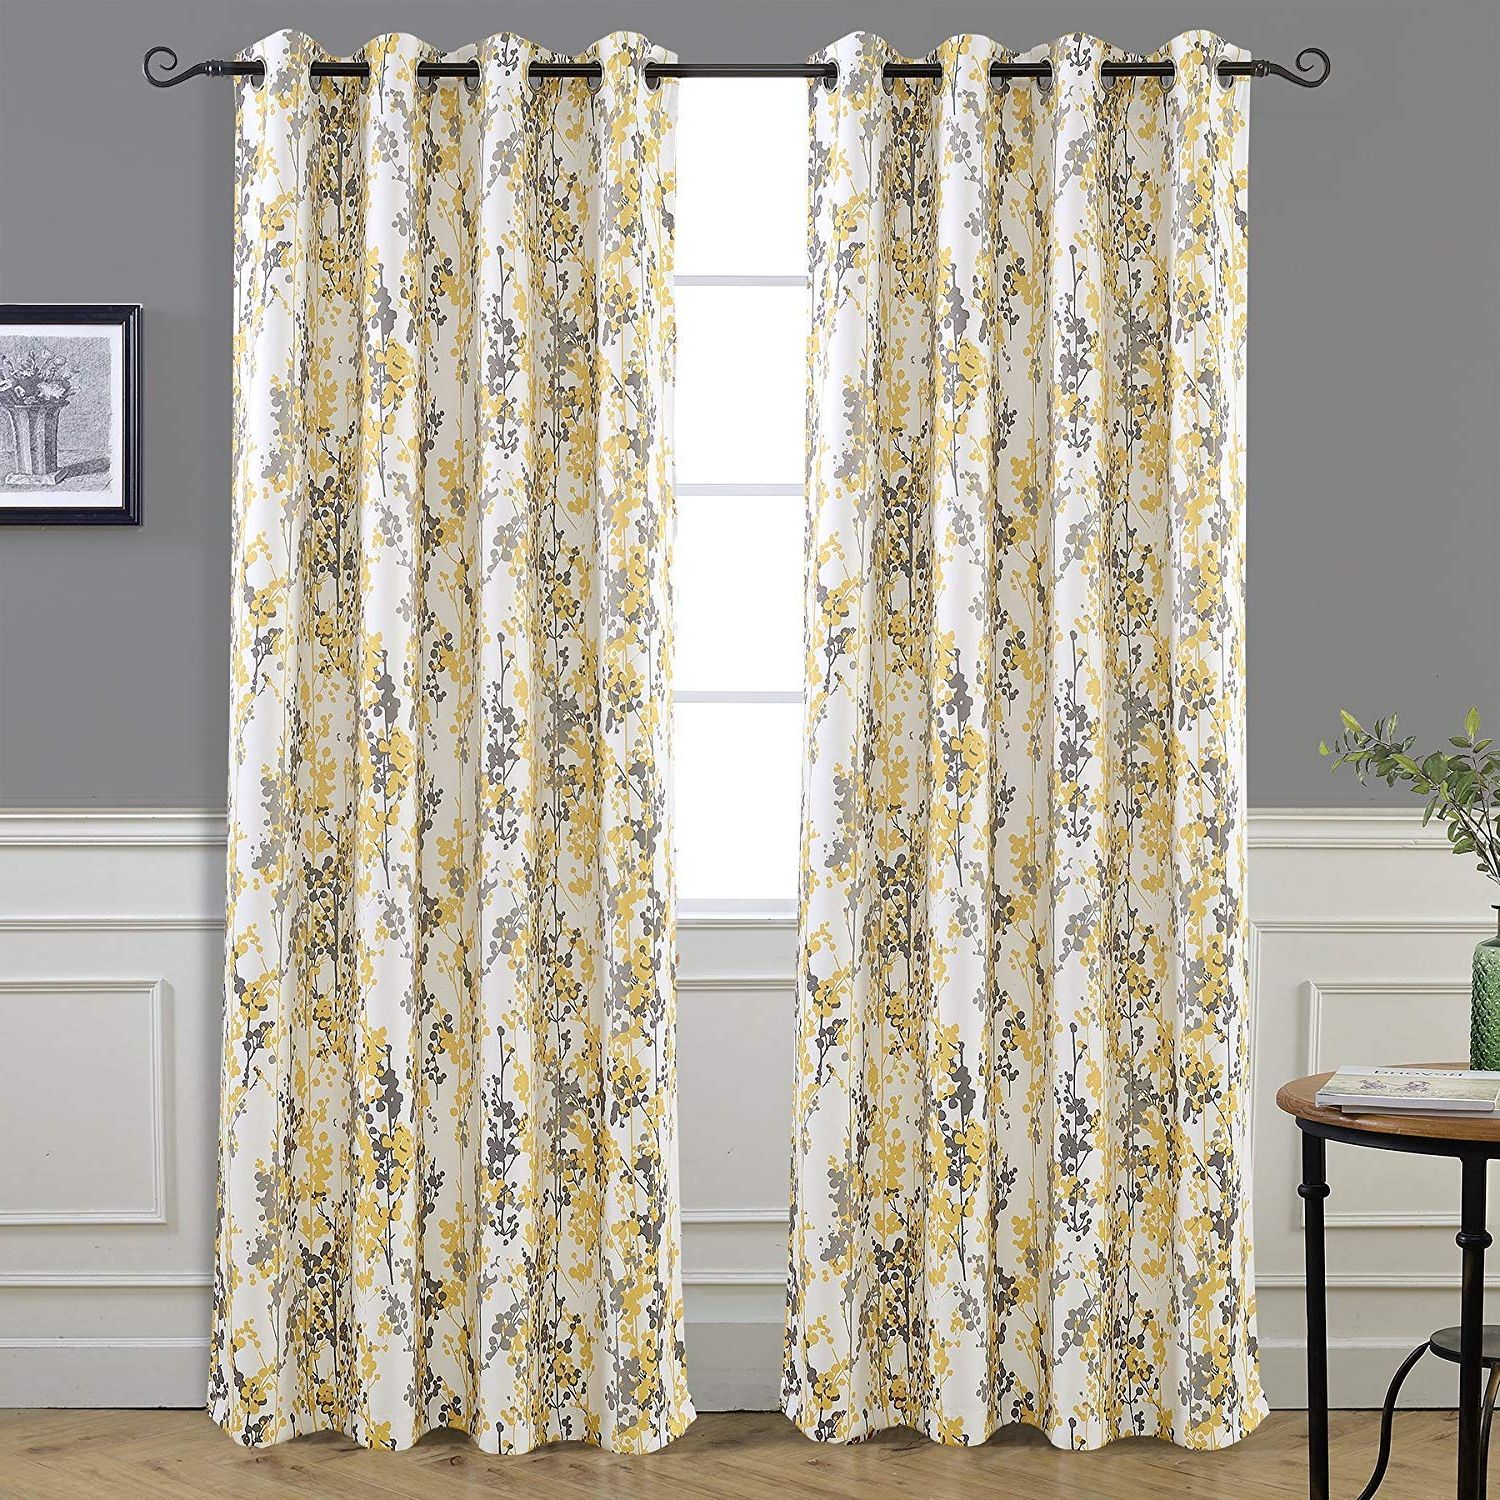 Well Known Driftaway Leah Abstract Floral Blossom Ink Painting Room Darkening Thermal  Insulated Grommet Unlined Window Curtains 2 Panels Each Size 52 Inch84 Intended For Leah Room Darkening Curtain Panel Pairs (View 16 of 20)